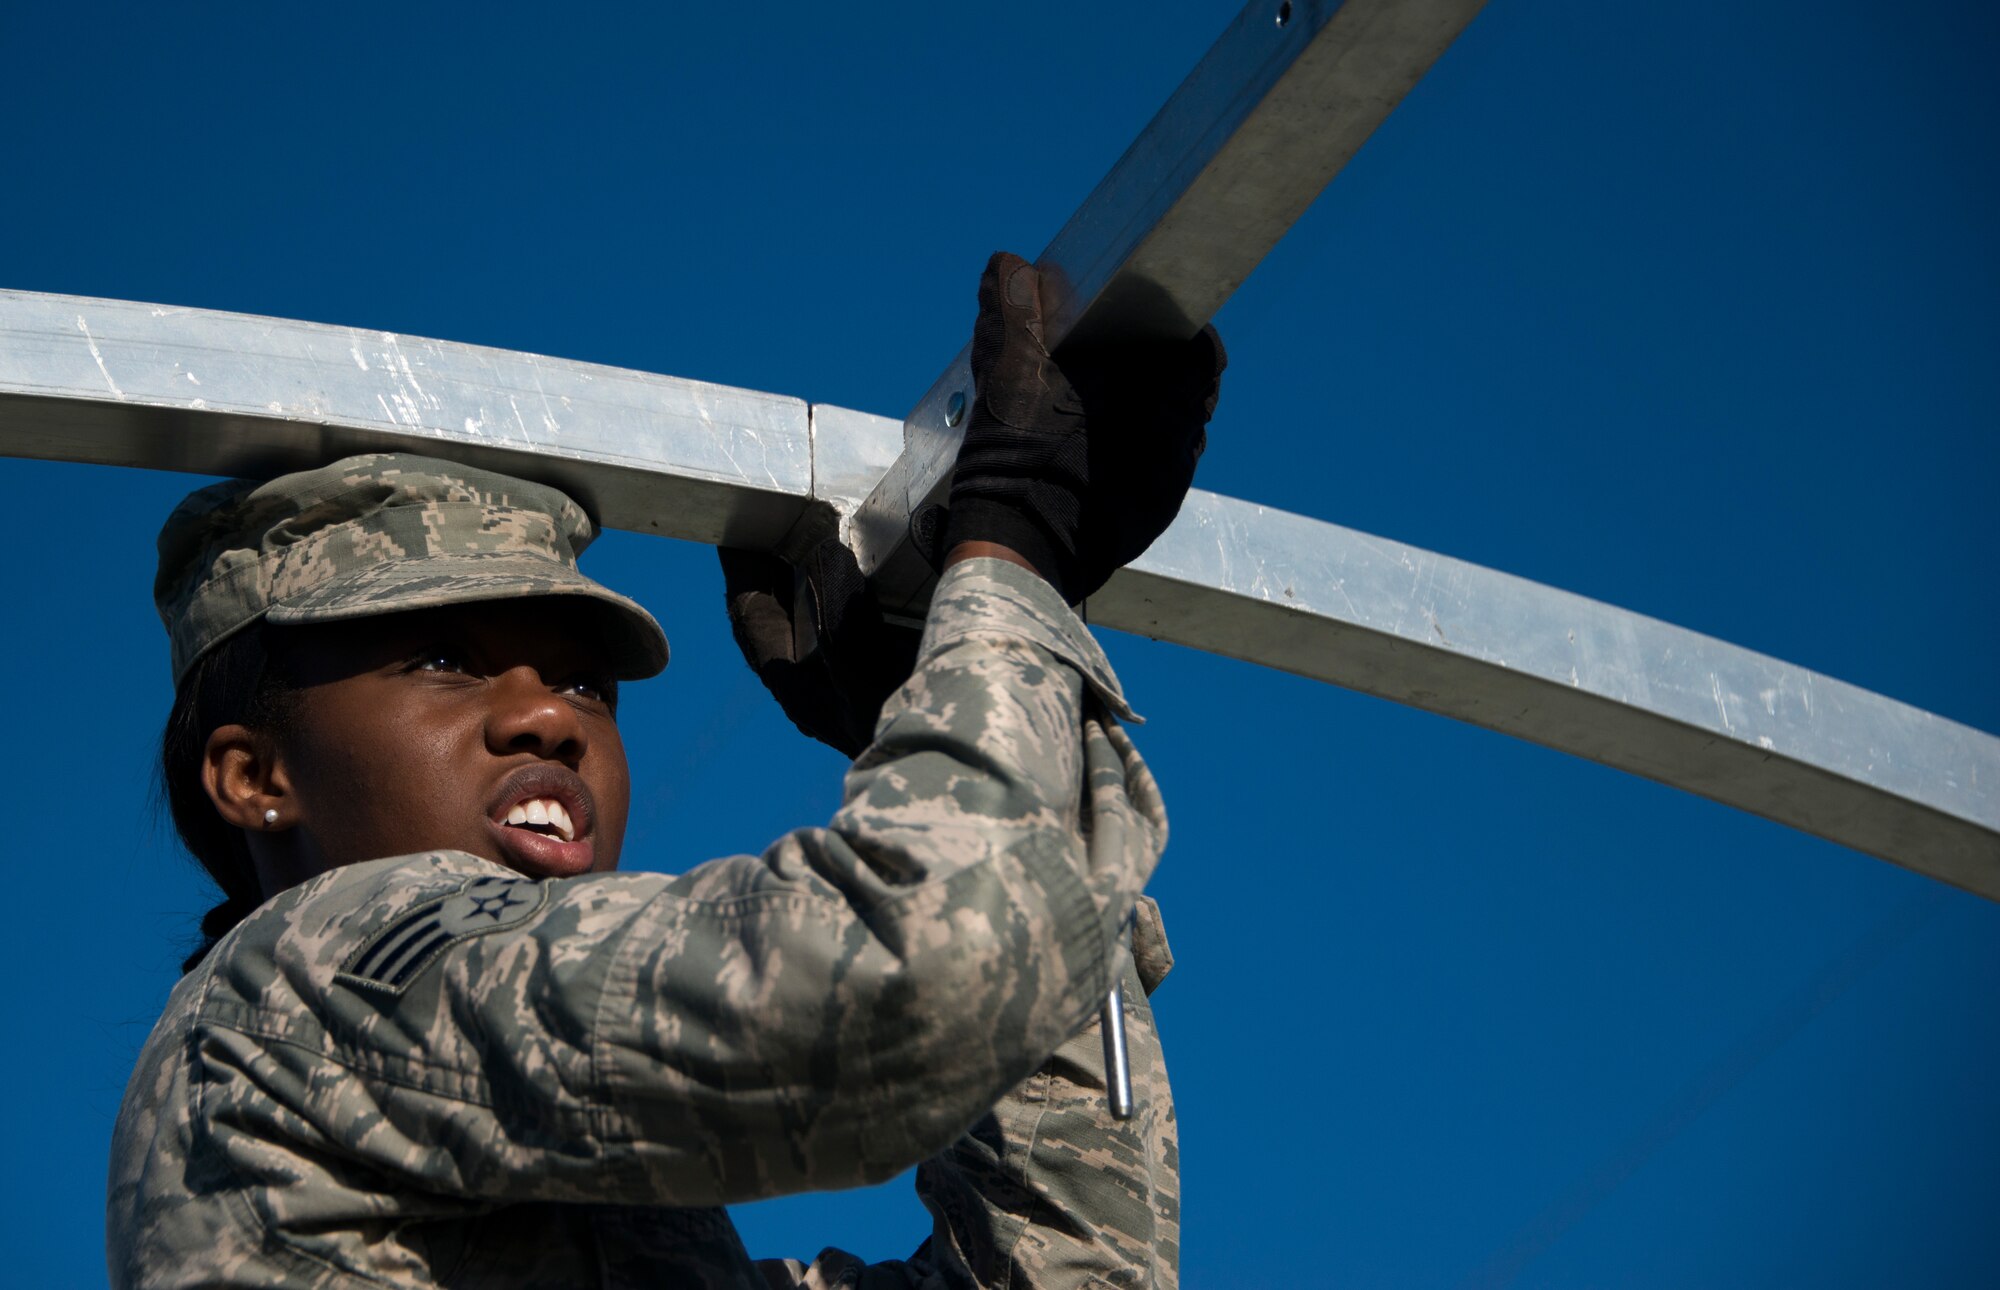 Senior Airman Charelle Baxter, 919th Special Operations Force Support Squadron, inserts a beam during small shelter system training at Duke Field, Fla., Sept. 13. The shelter takes six fully trained personnel approximately three and a half hours to complete. The SSS training is part of annual home station readiness training for all members of the squadron. (U.S. Air Force photo/ Tech. Sgt. Jasmin Taylor)  